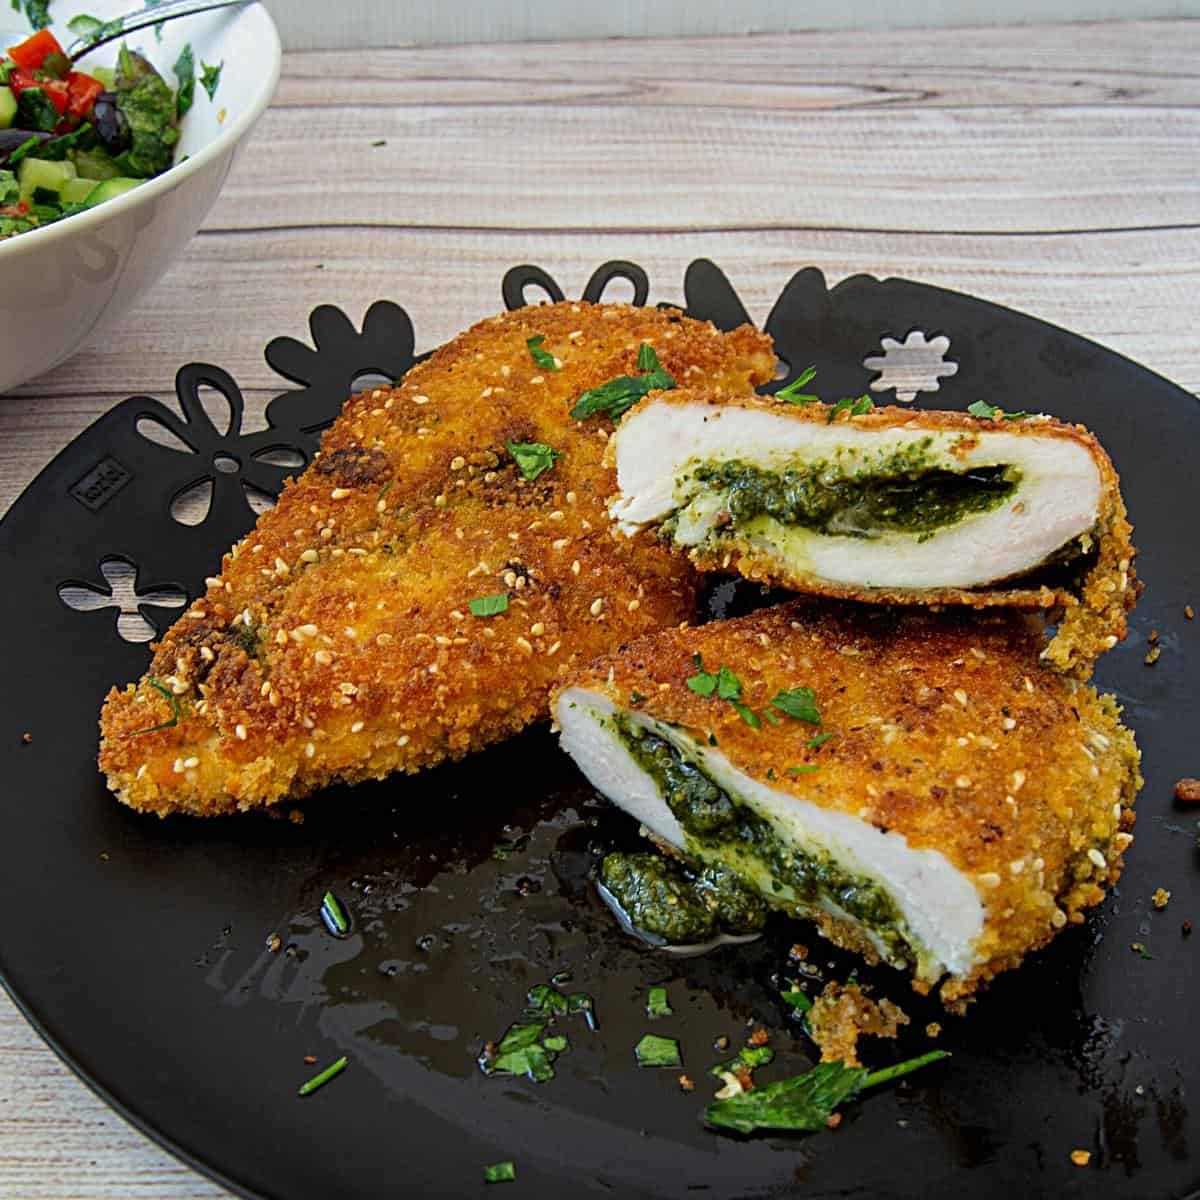 A plate with stuffed and breaded chicken breast.